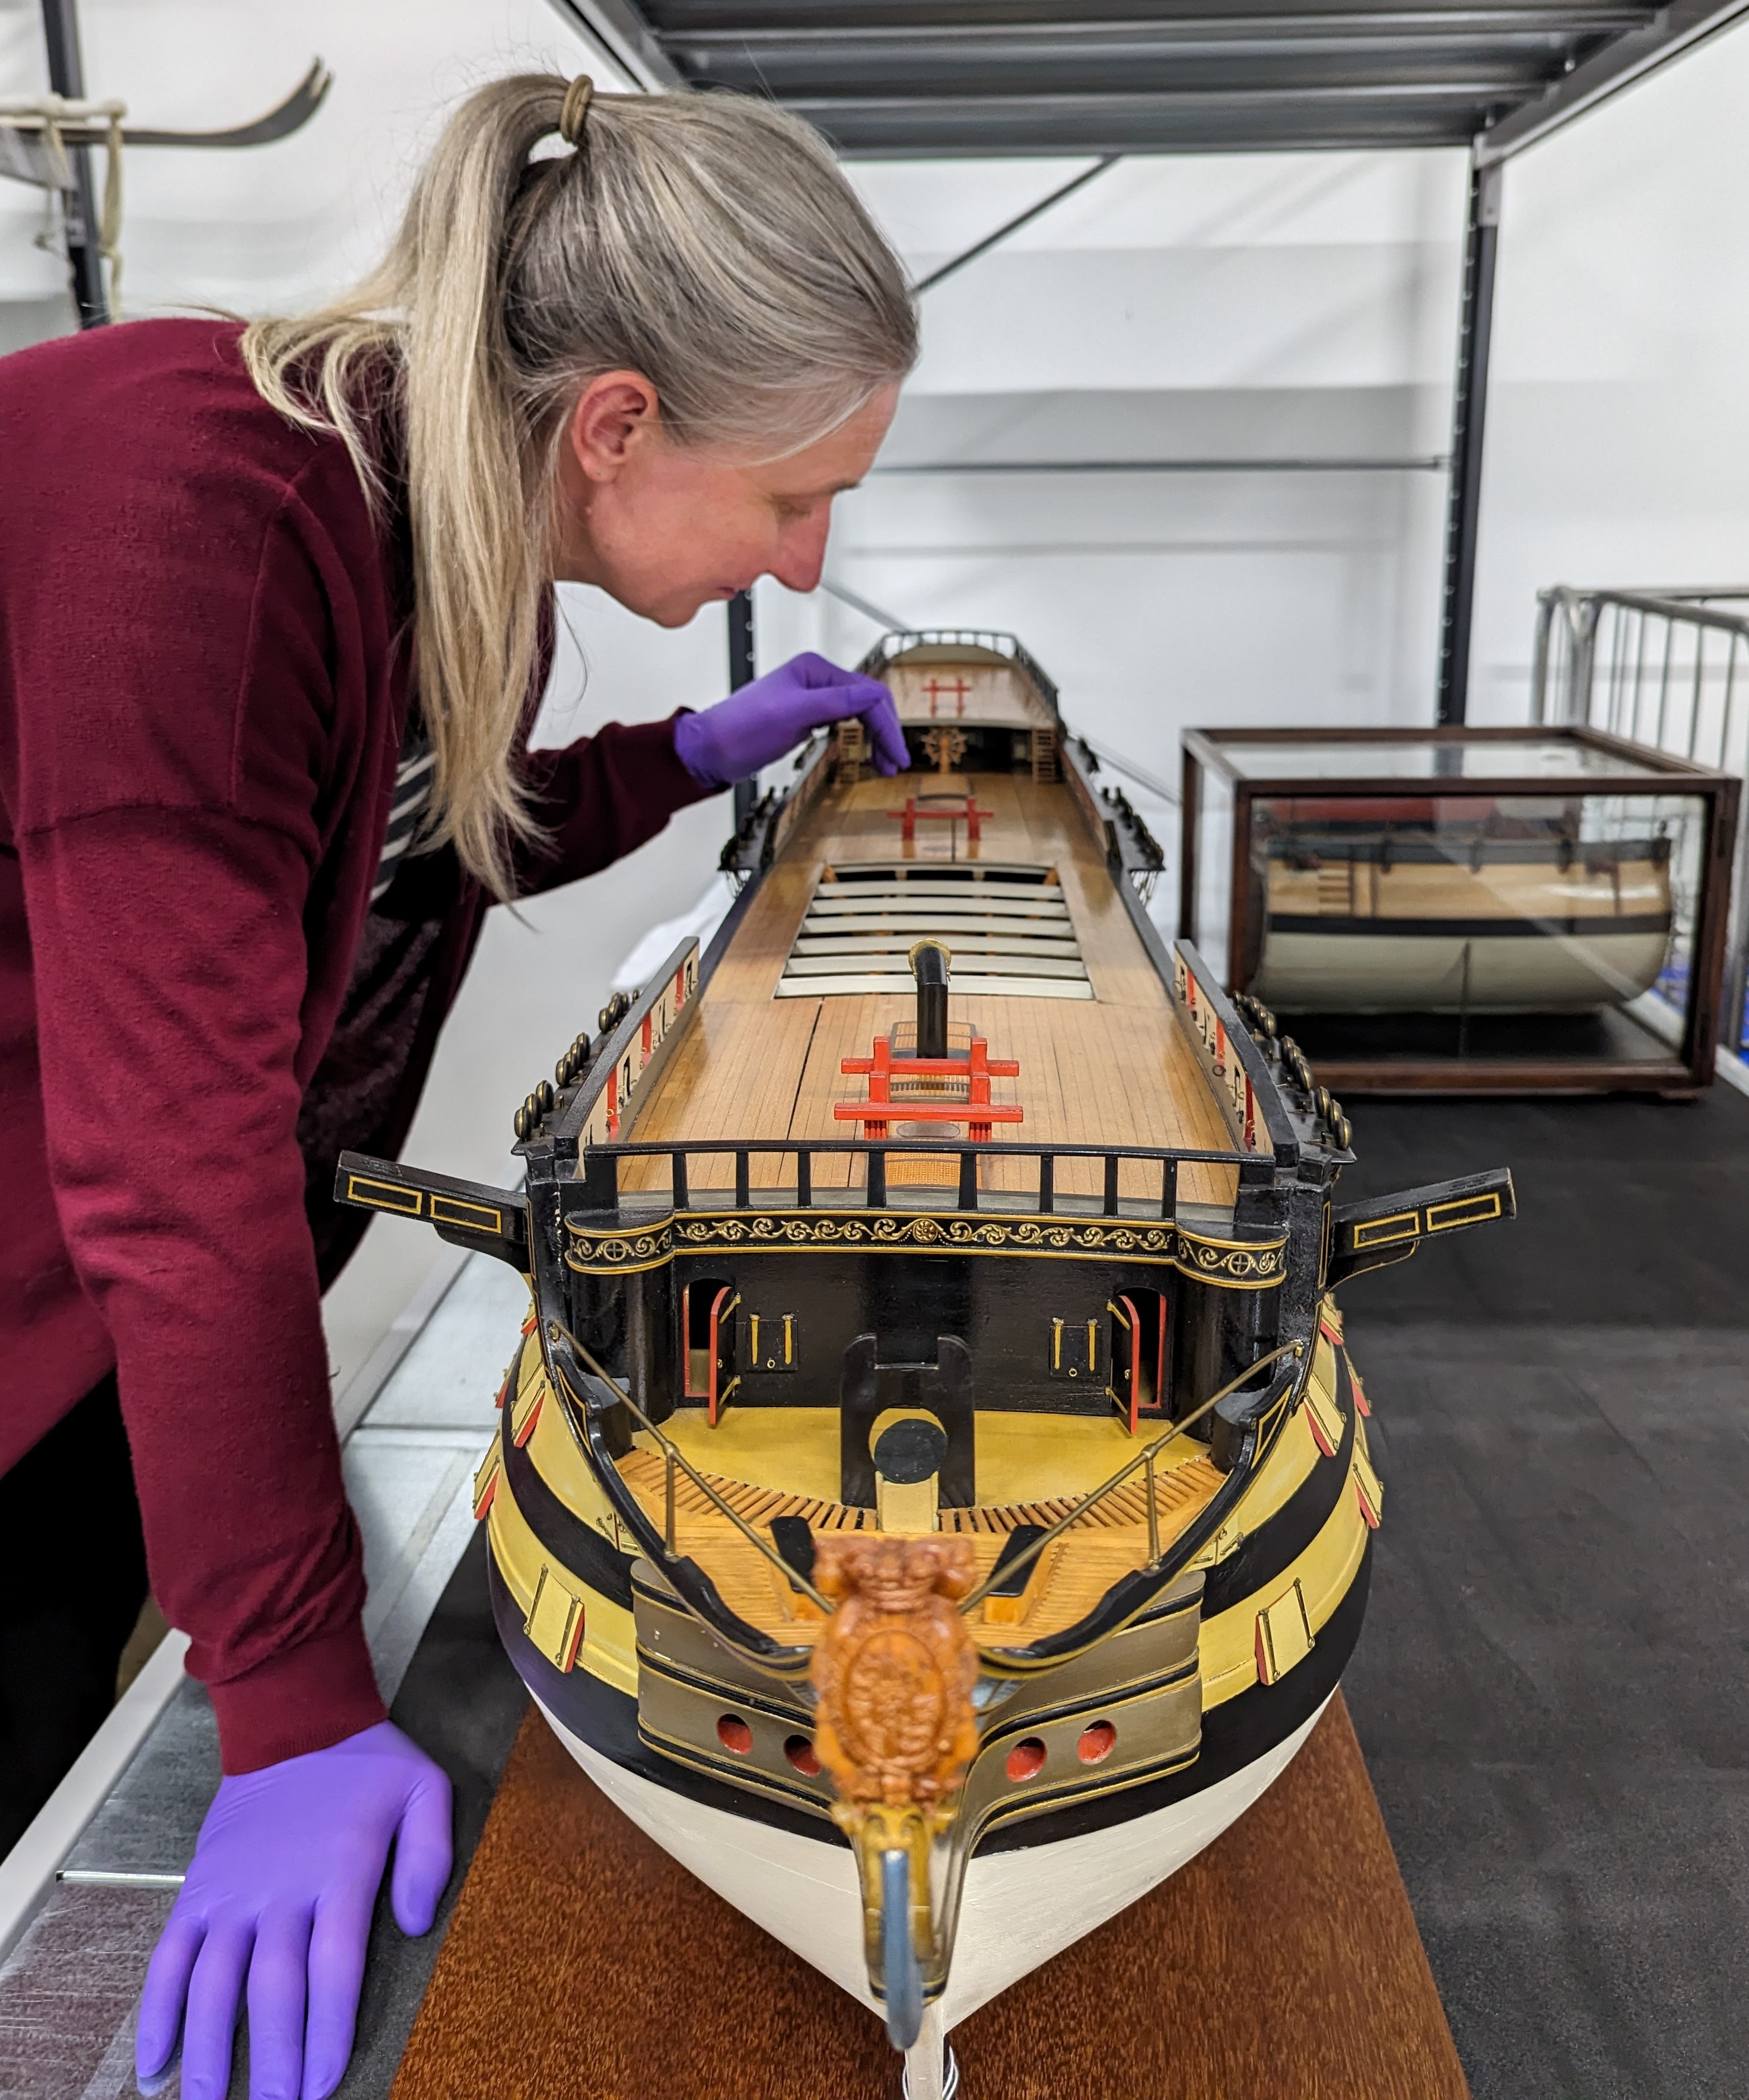 The model of HMS Victory is inspected by Principal Curator Victoria Ingles